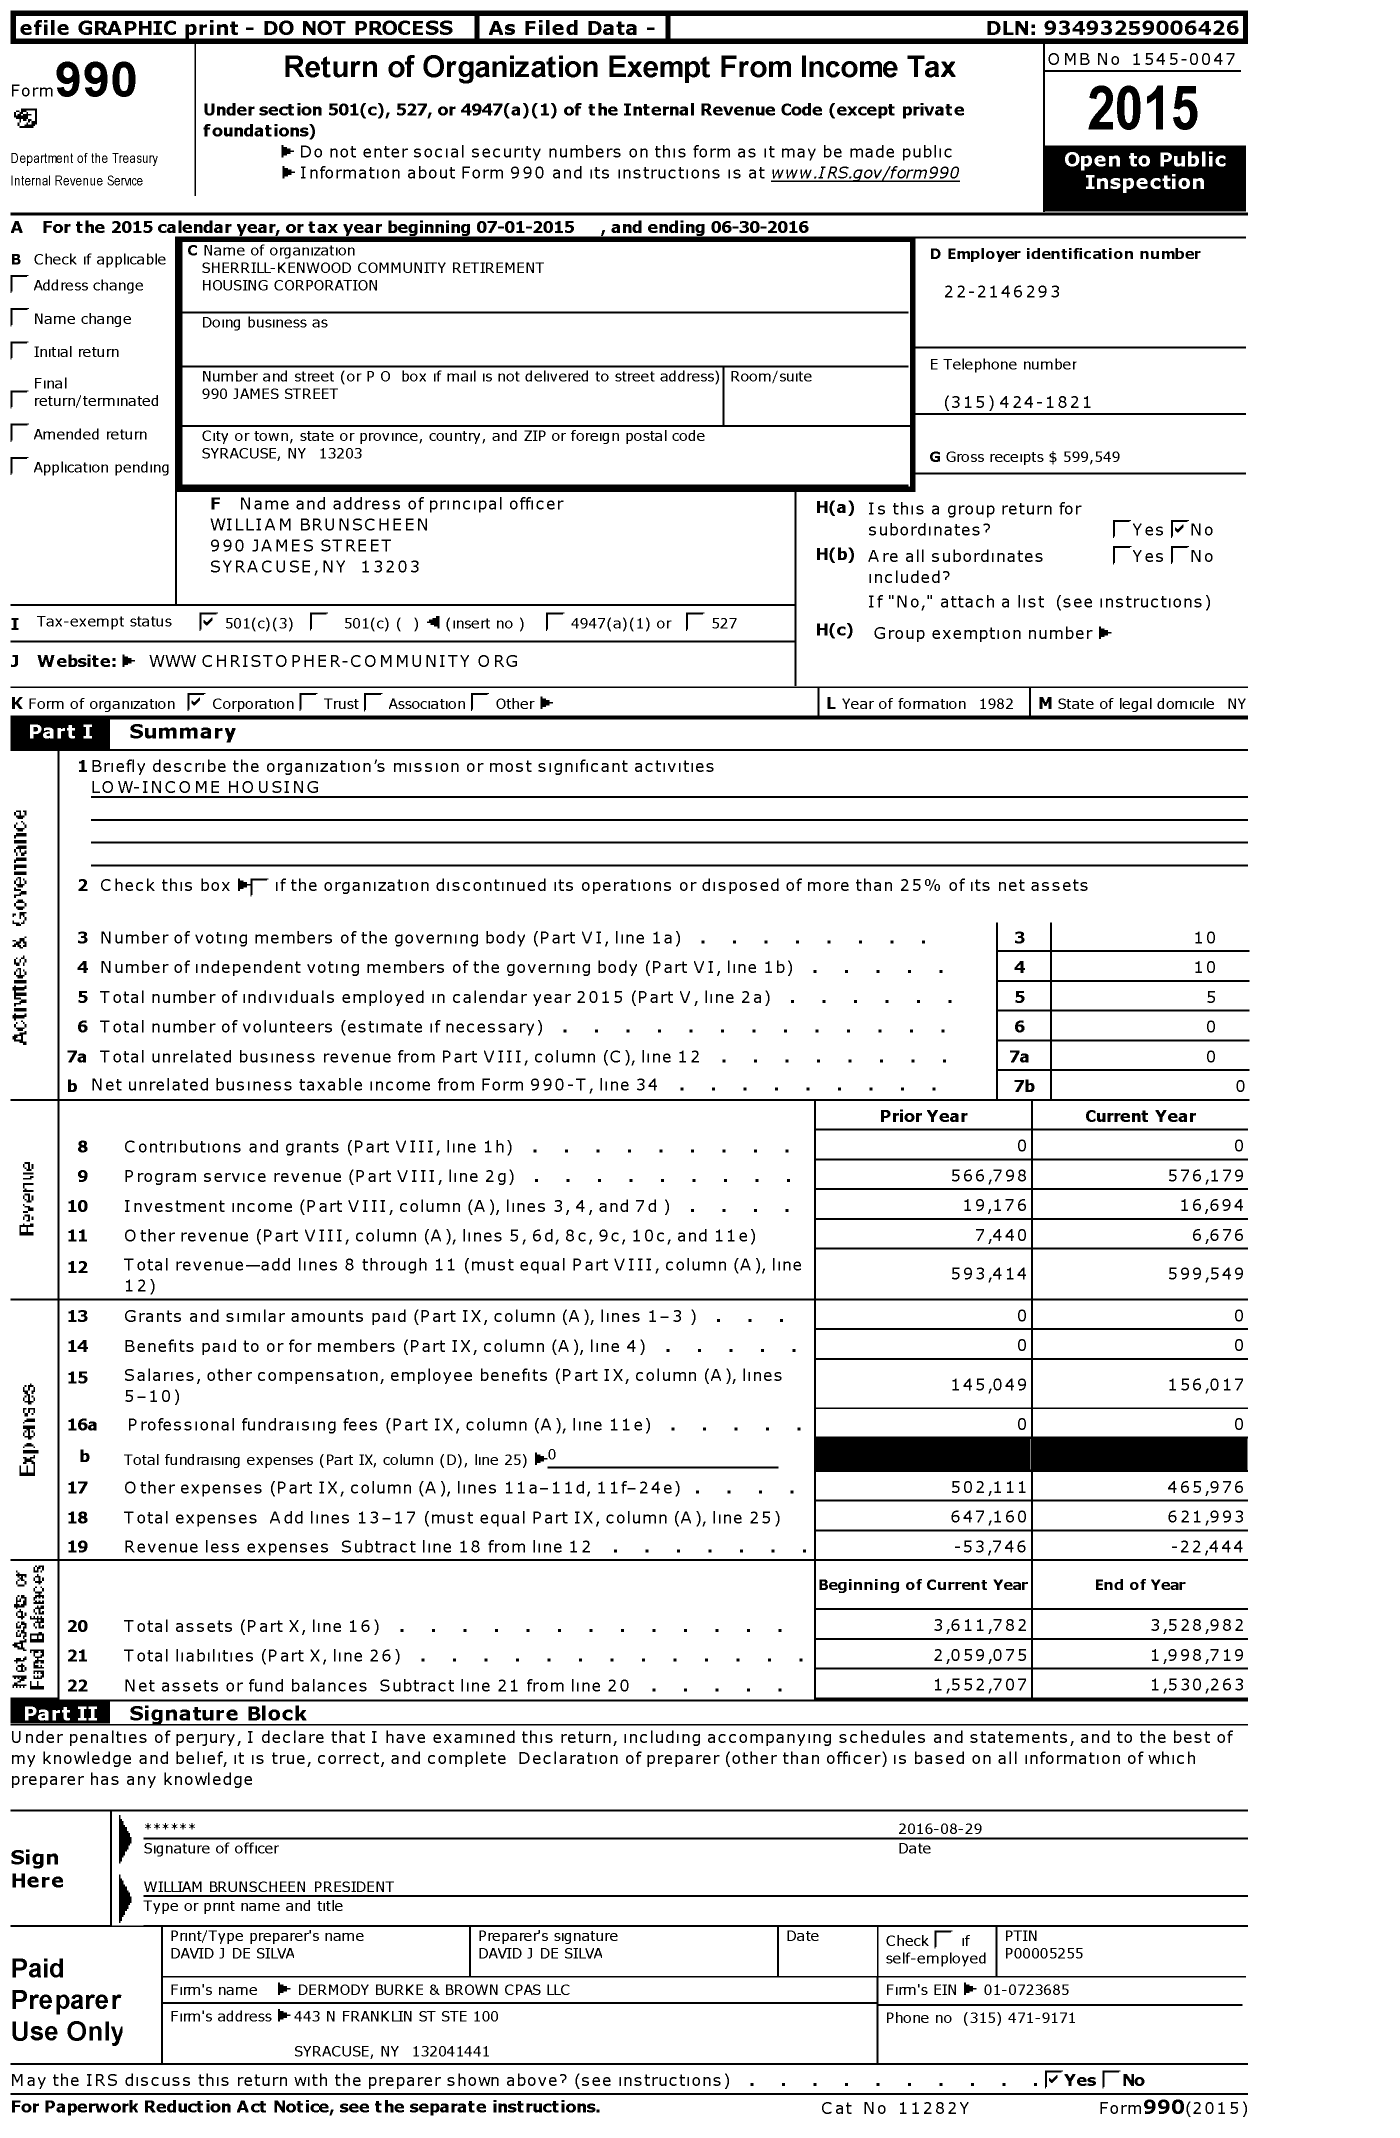 Image of first page of 2015 Form 990 for Sherrill-Kenwood Community Retirement Housing Corporation